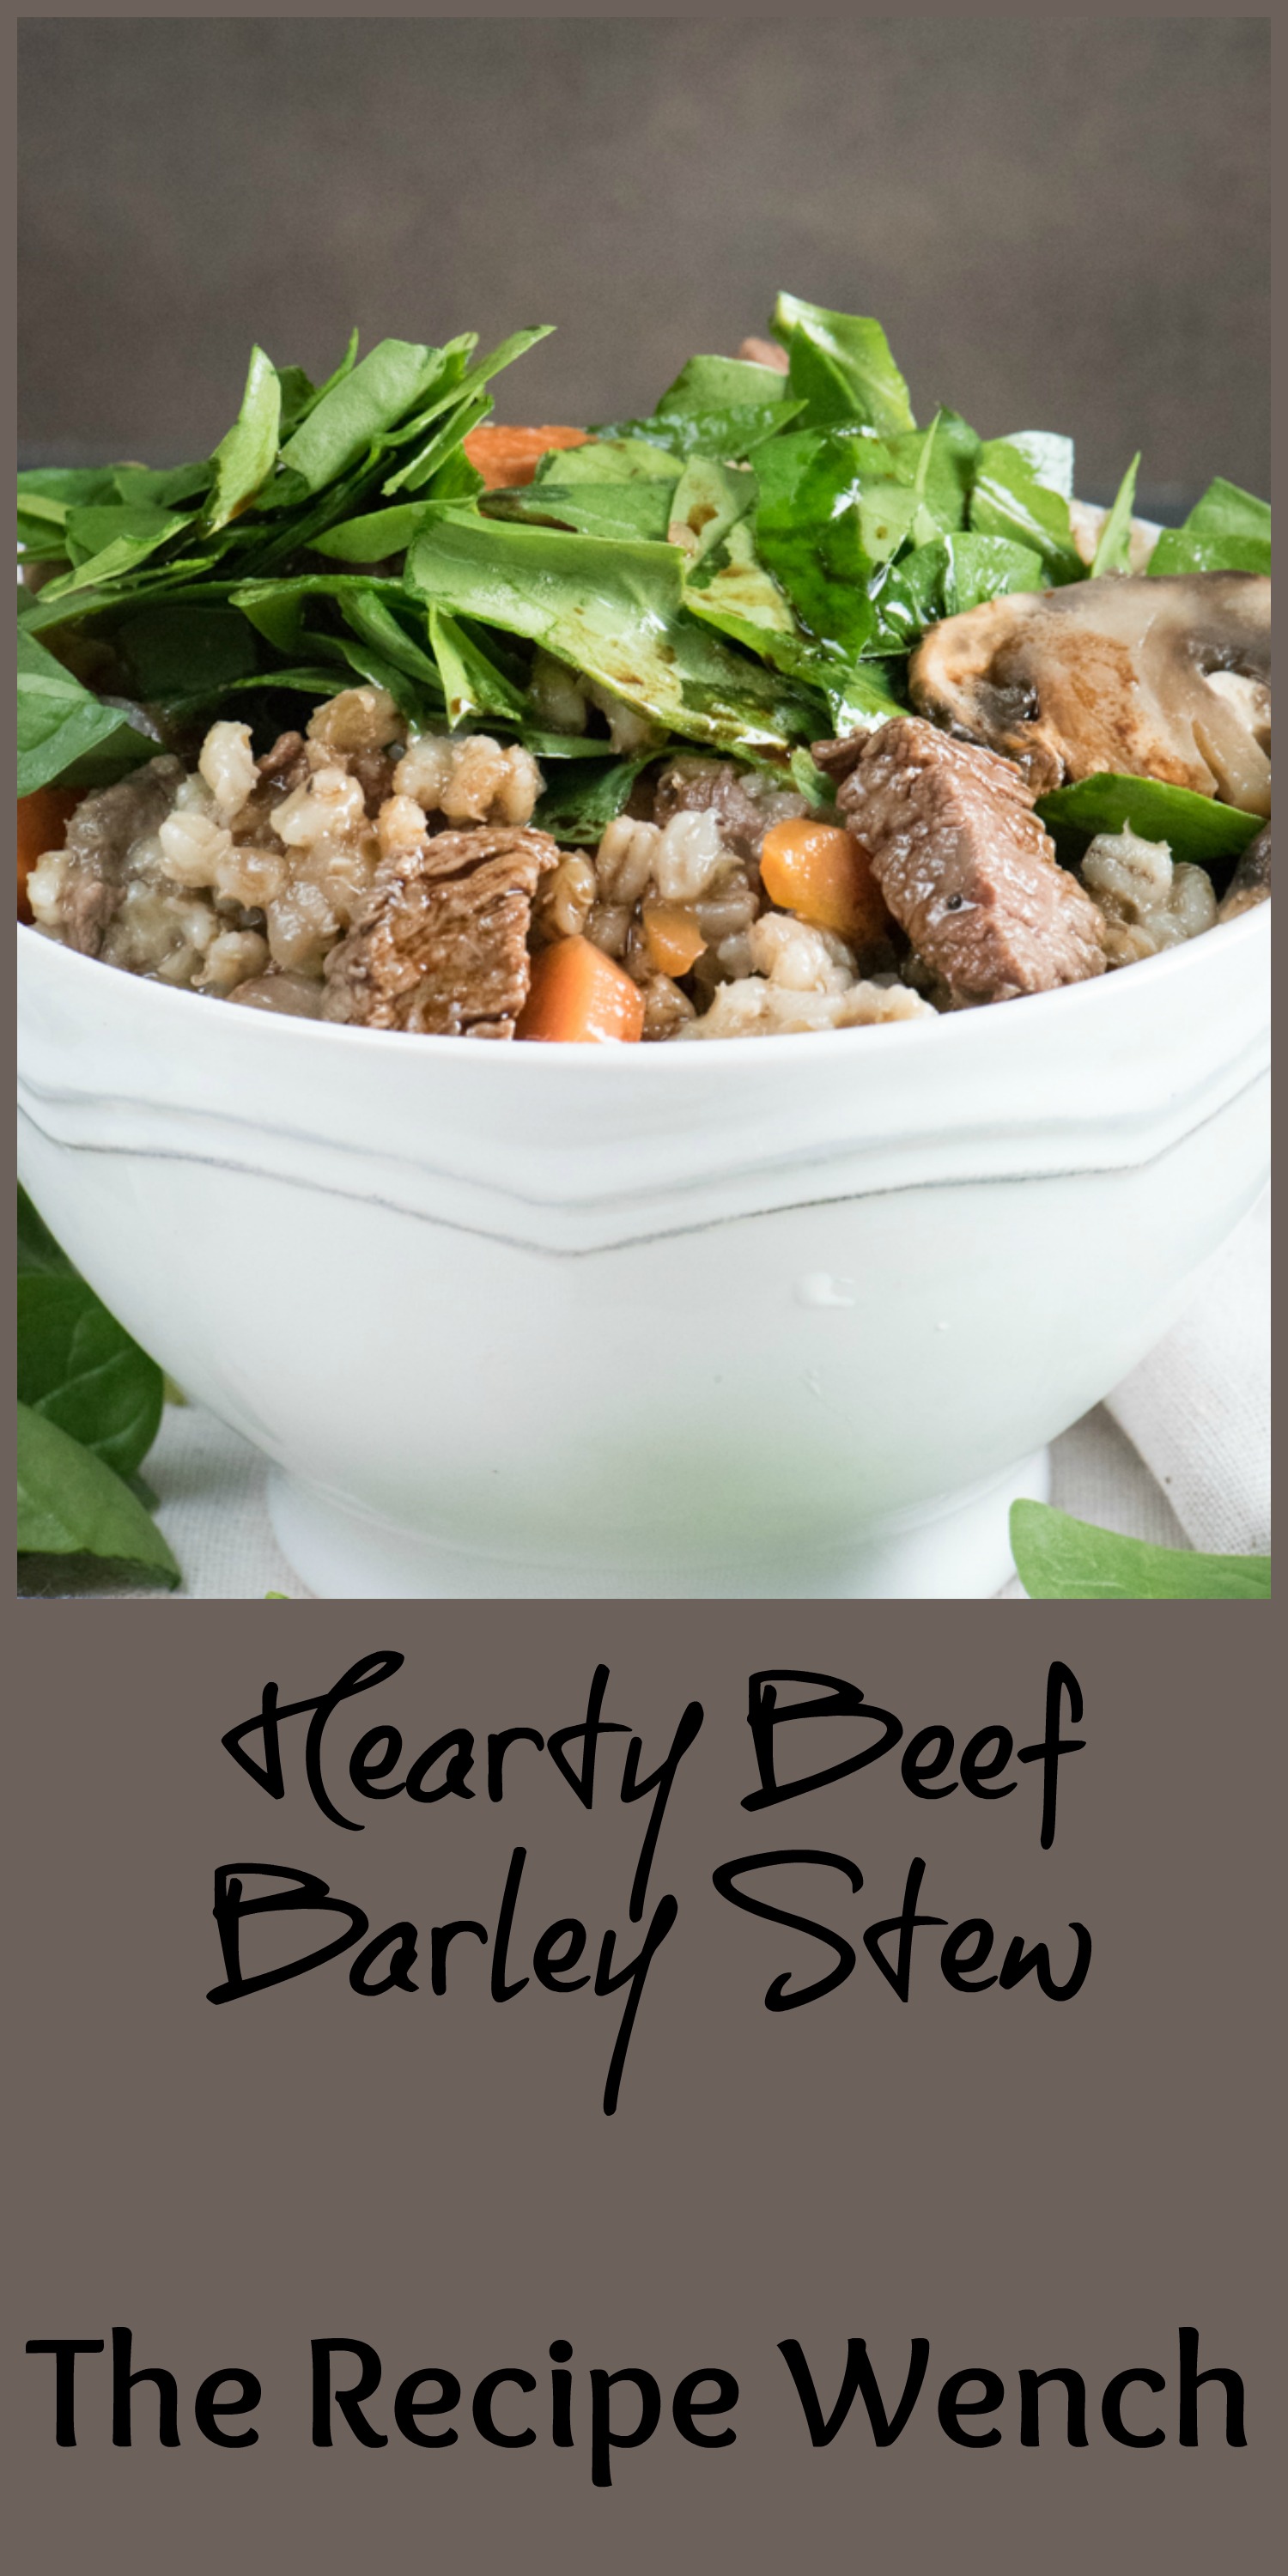 Hearty beef barley stew with mushrooms and spinach. Easy comfort food! | The Recipe Wench